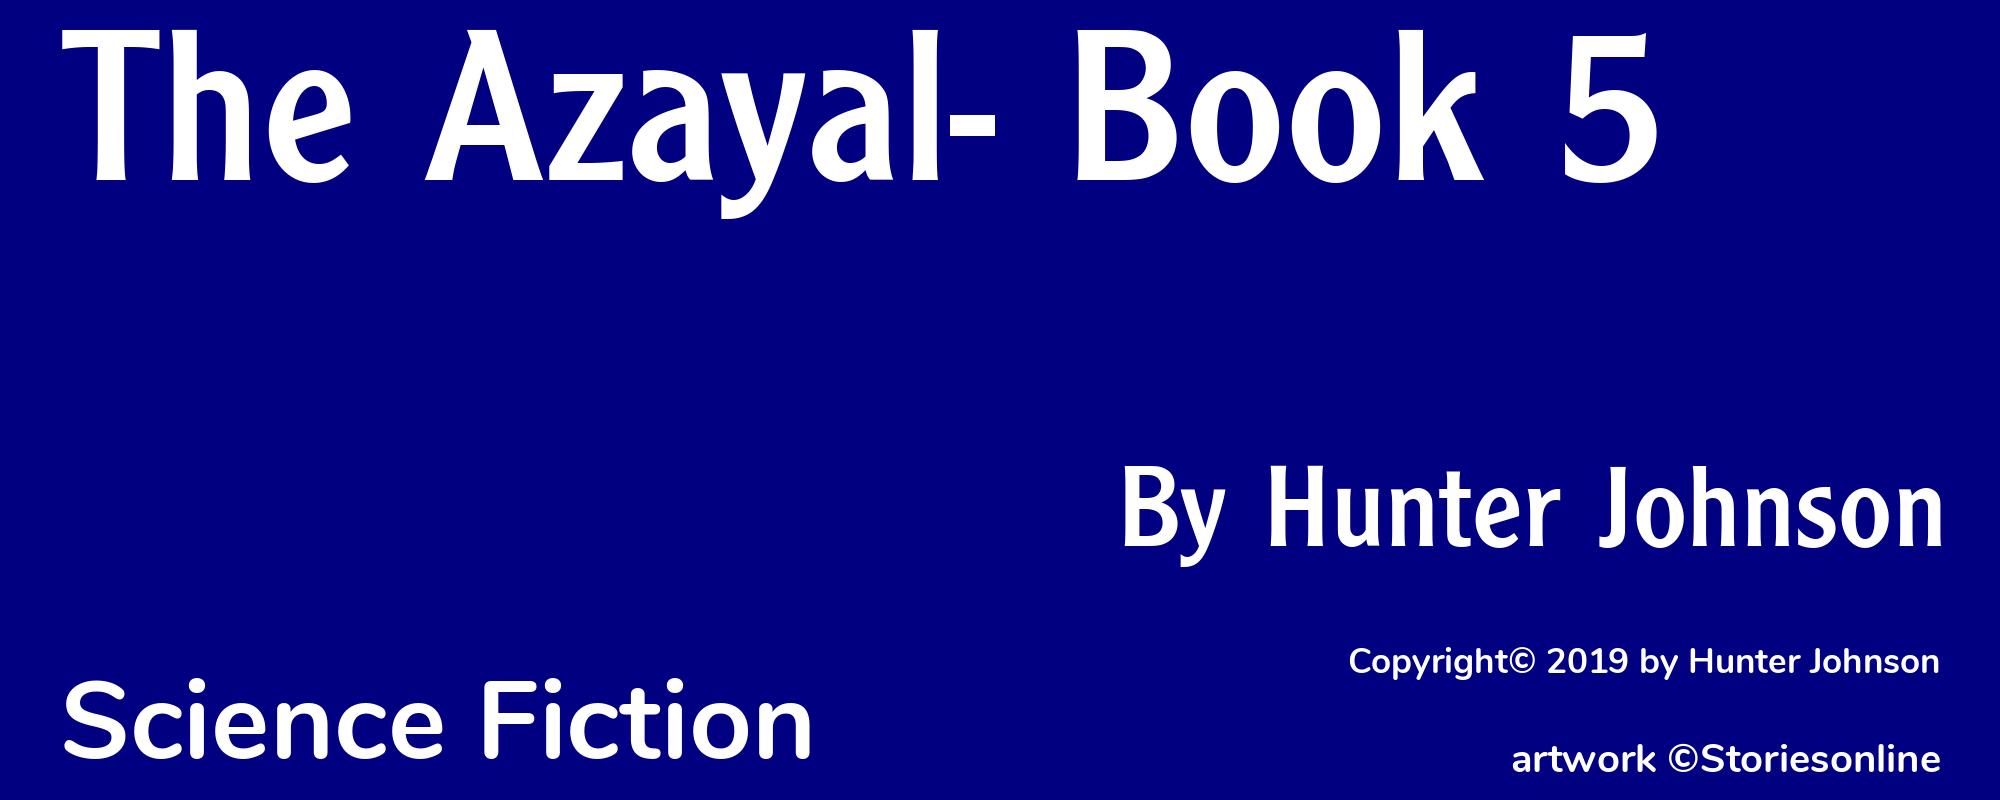 The Azayal- Book 5 - Cover